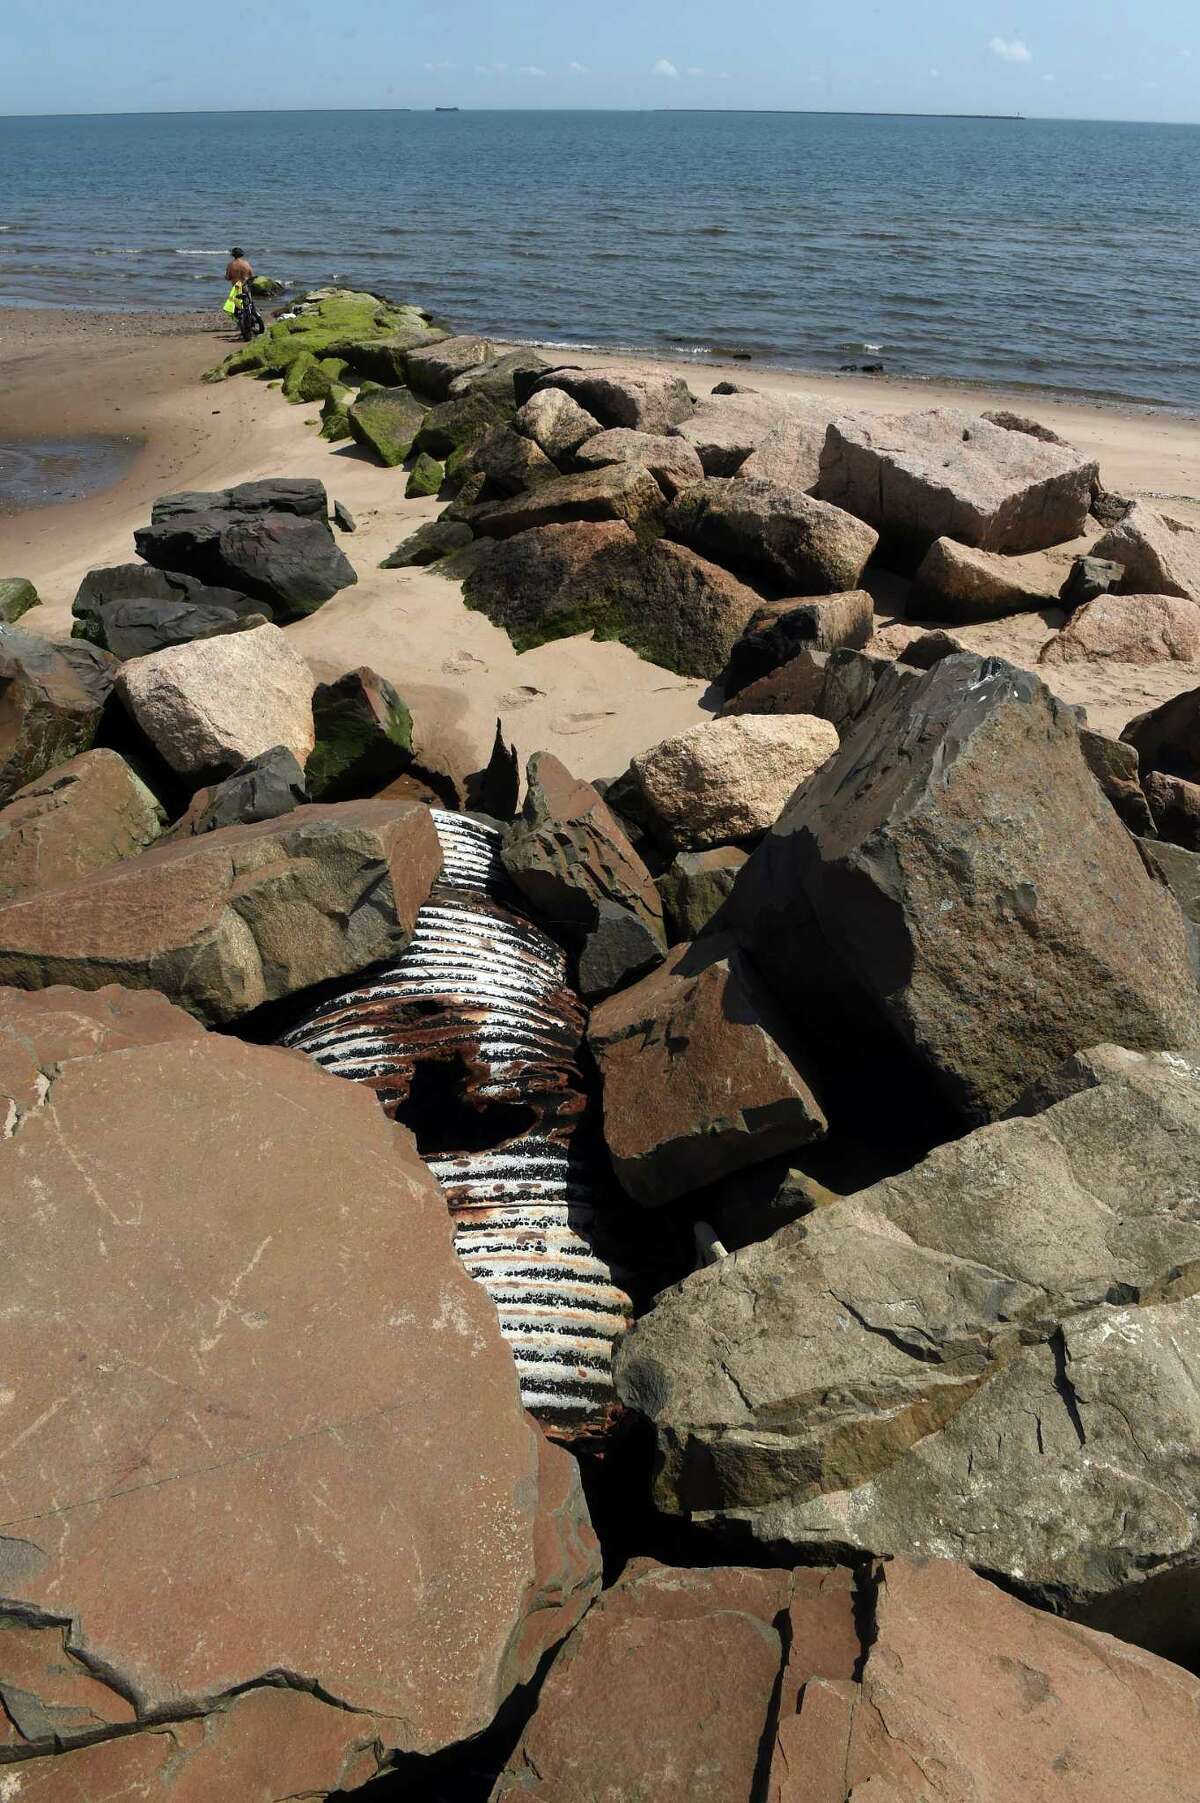 An outflow pipe at the beach near Lake Street and Ocean Avenue in West Haven photographed on Aug. 8, 2022.